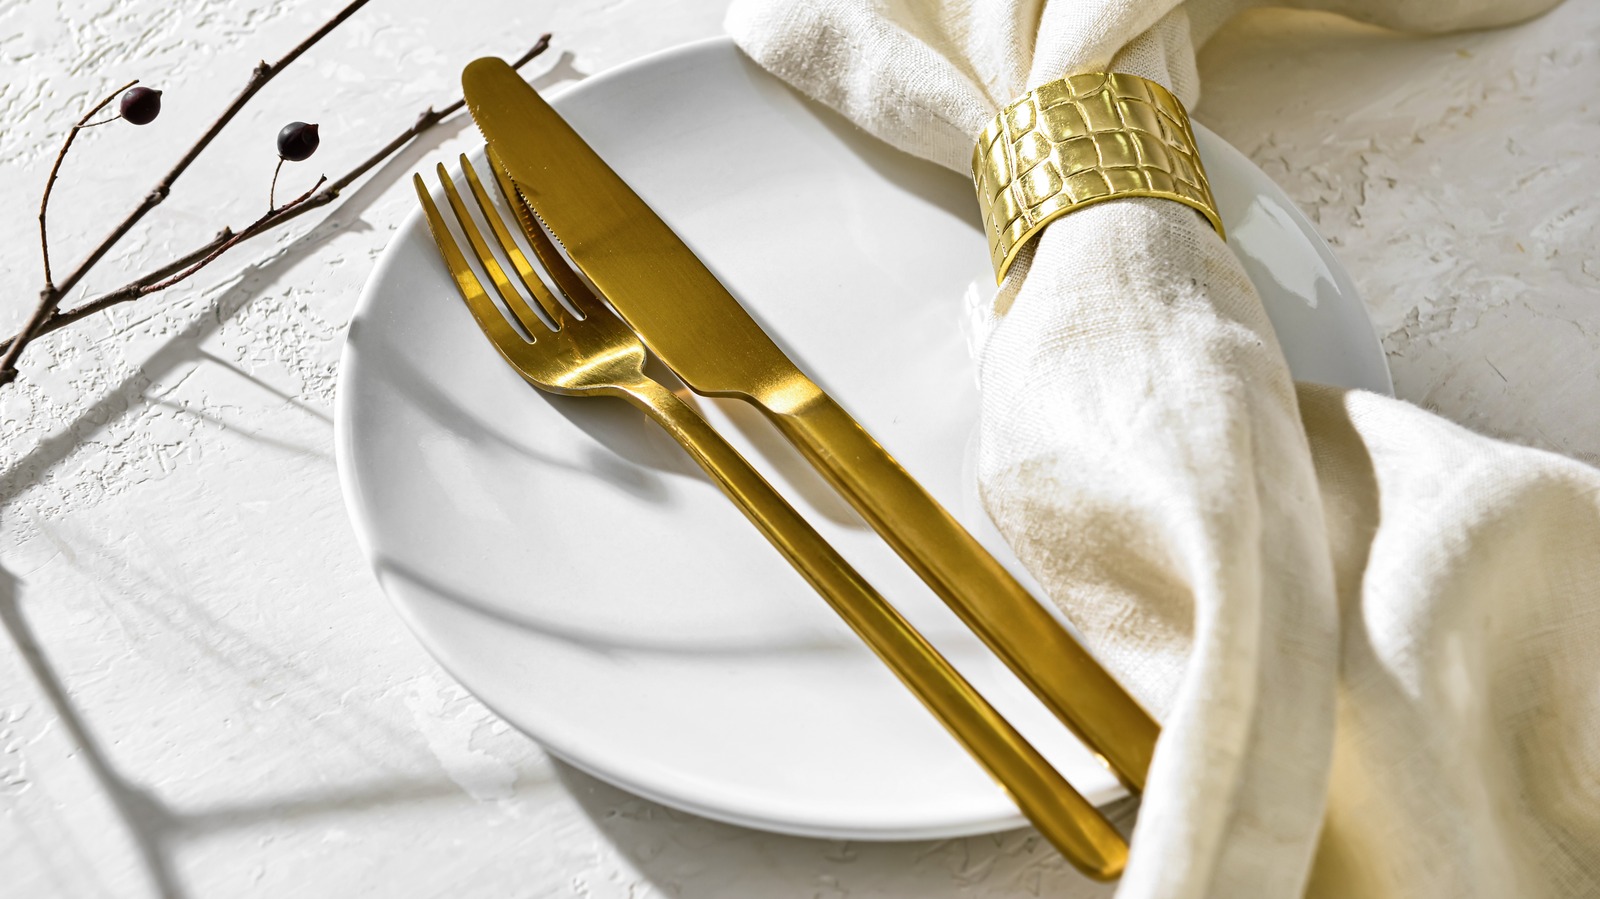 20-40-60 Etiquette: Don't fold to bad cloth napkin manners